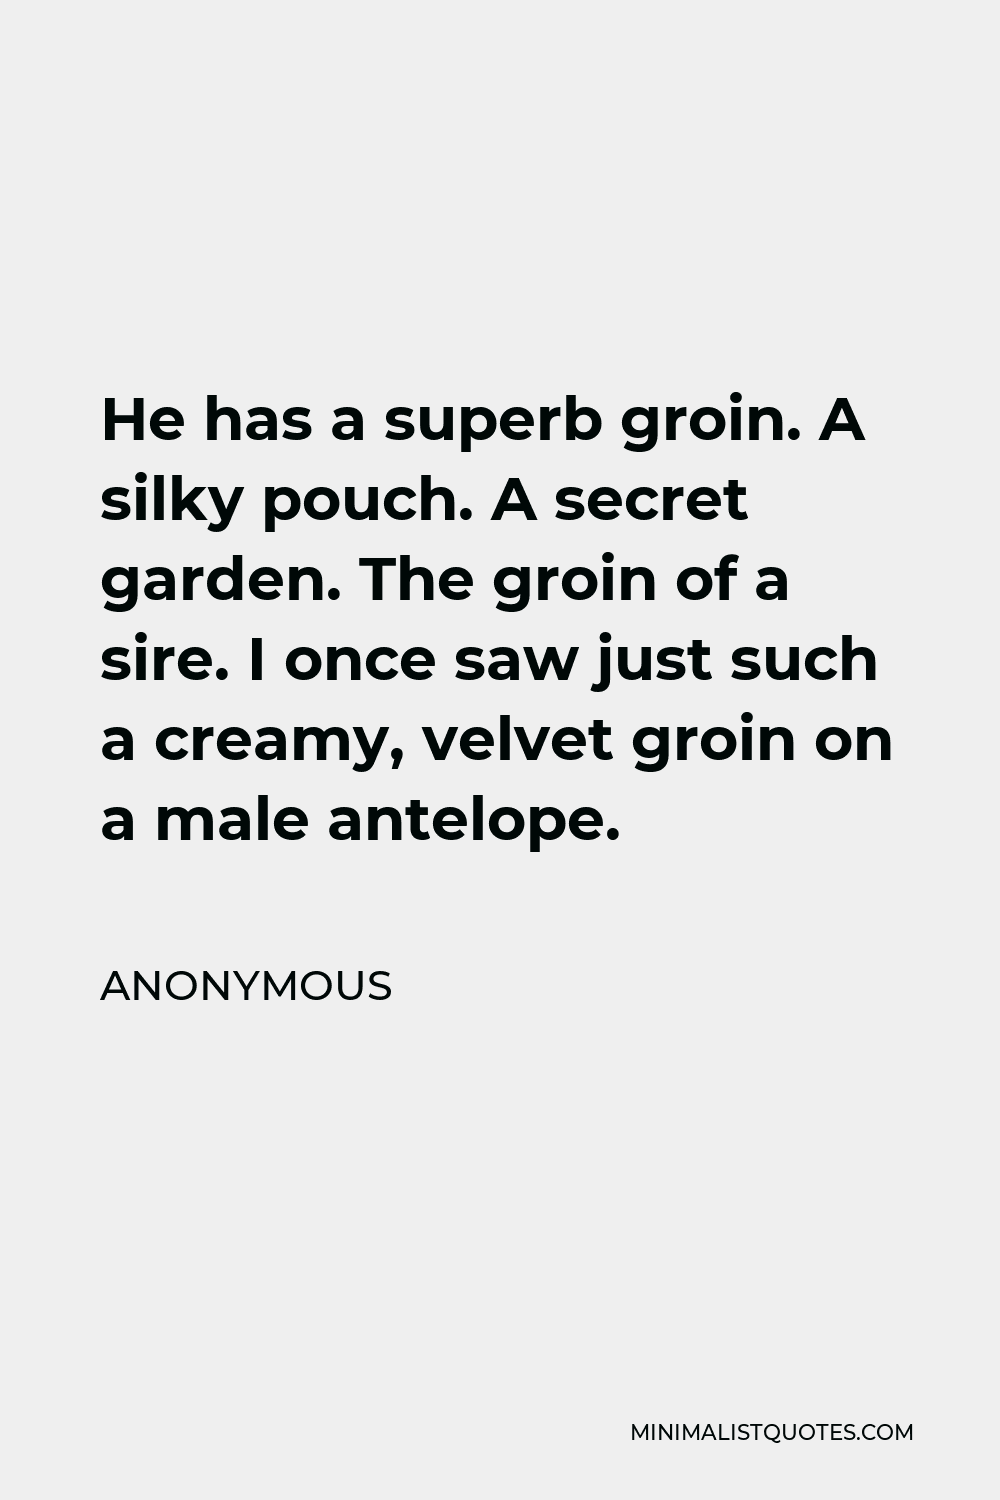 Anonymous Quote - He has a superb groin. A silky pouch. A secret garden. The groin of a sire. I once saw just such a creamy, velvet groin on a male antelope.